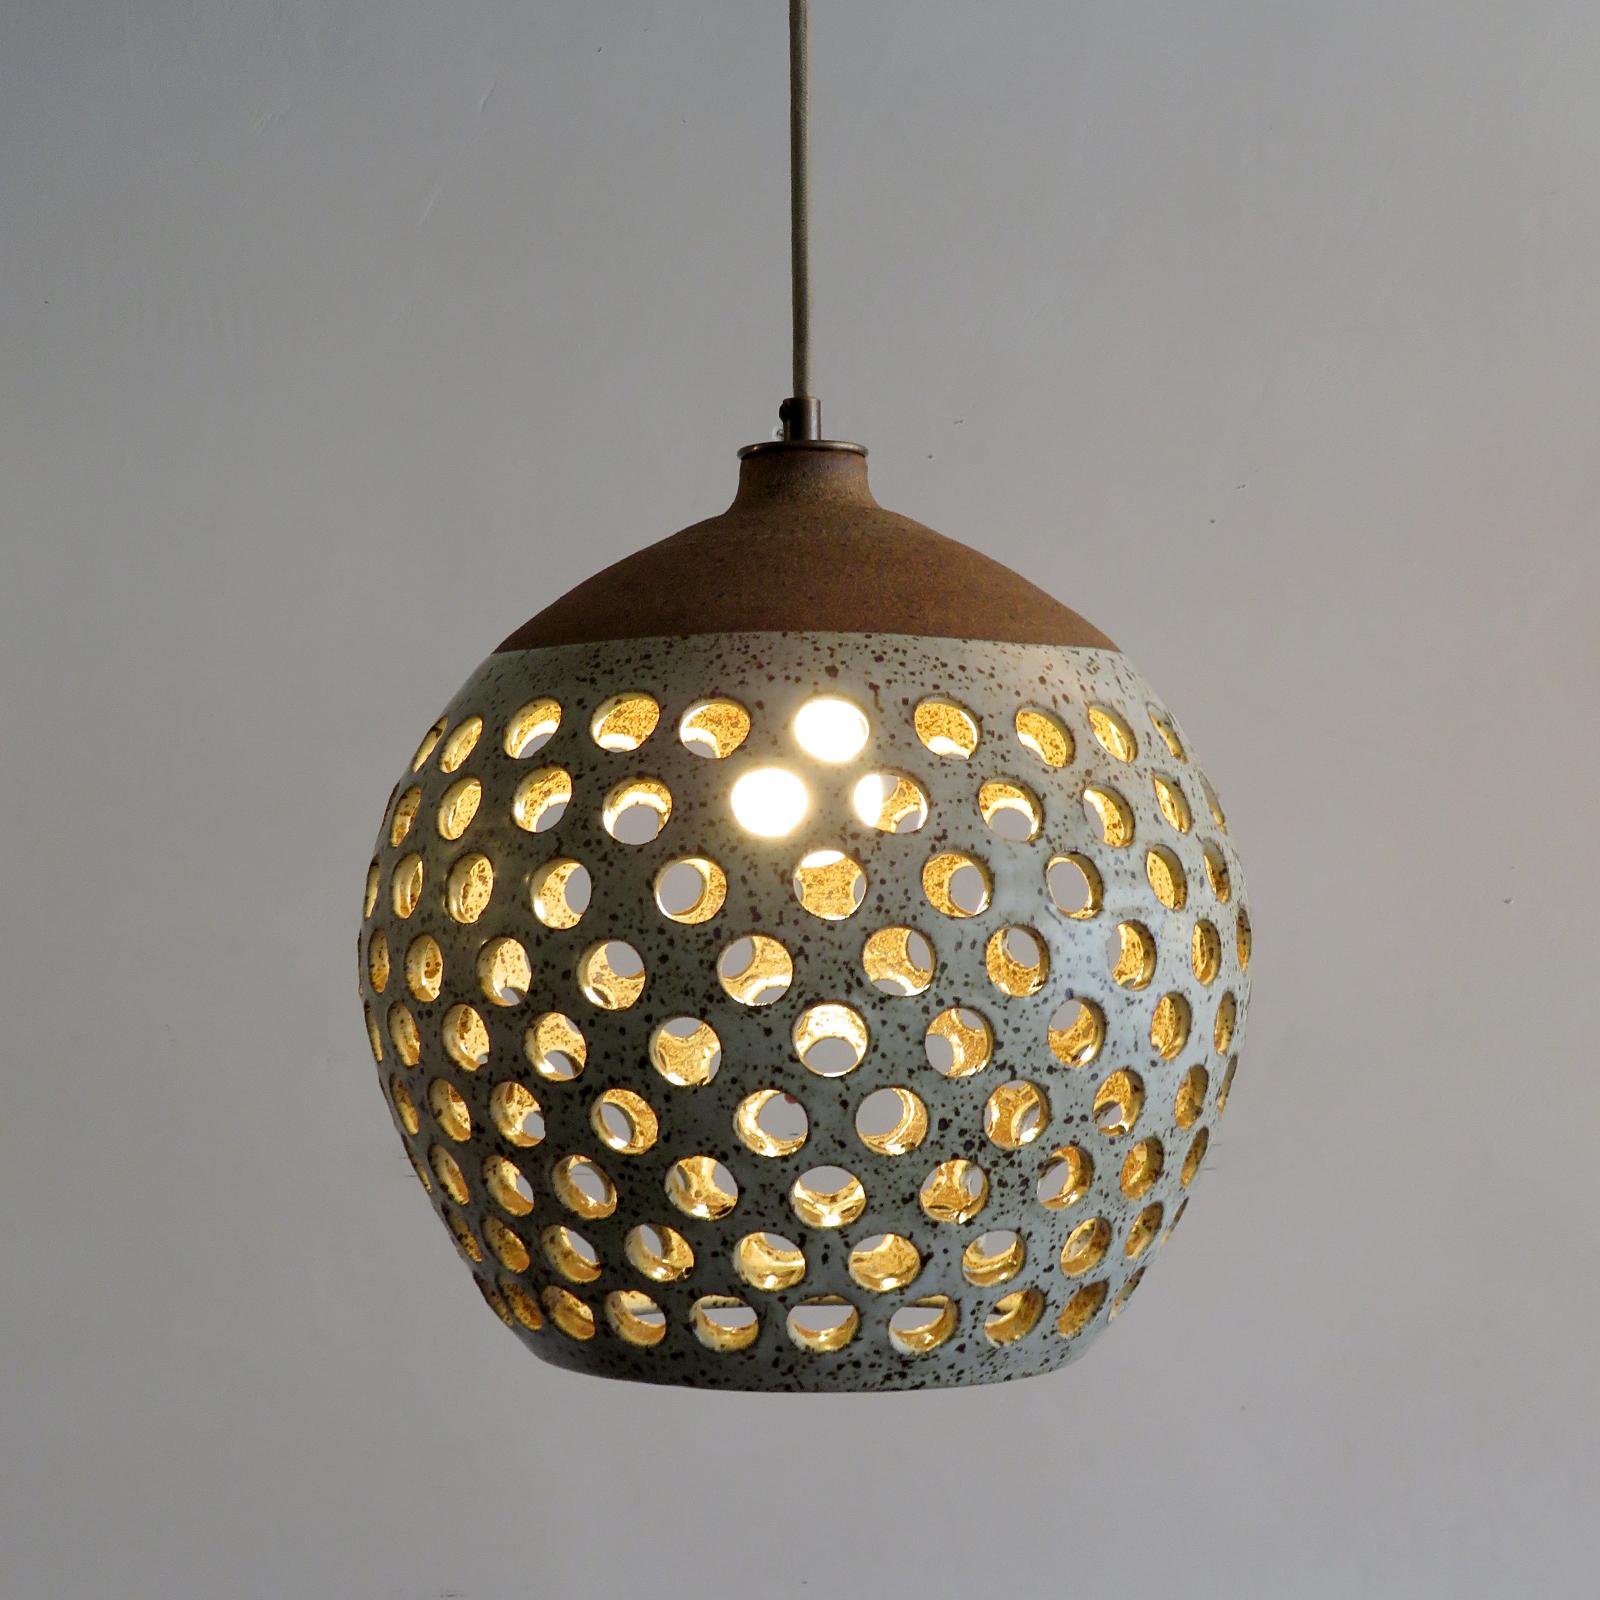 Ceramic Pendant Light No. L519 by Heather Levine In New Condition For Sale In Los Angeles, CA